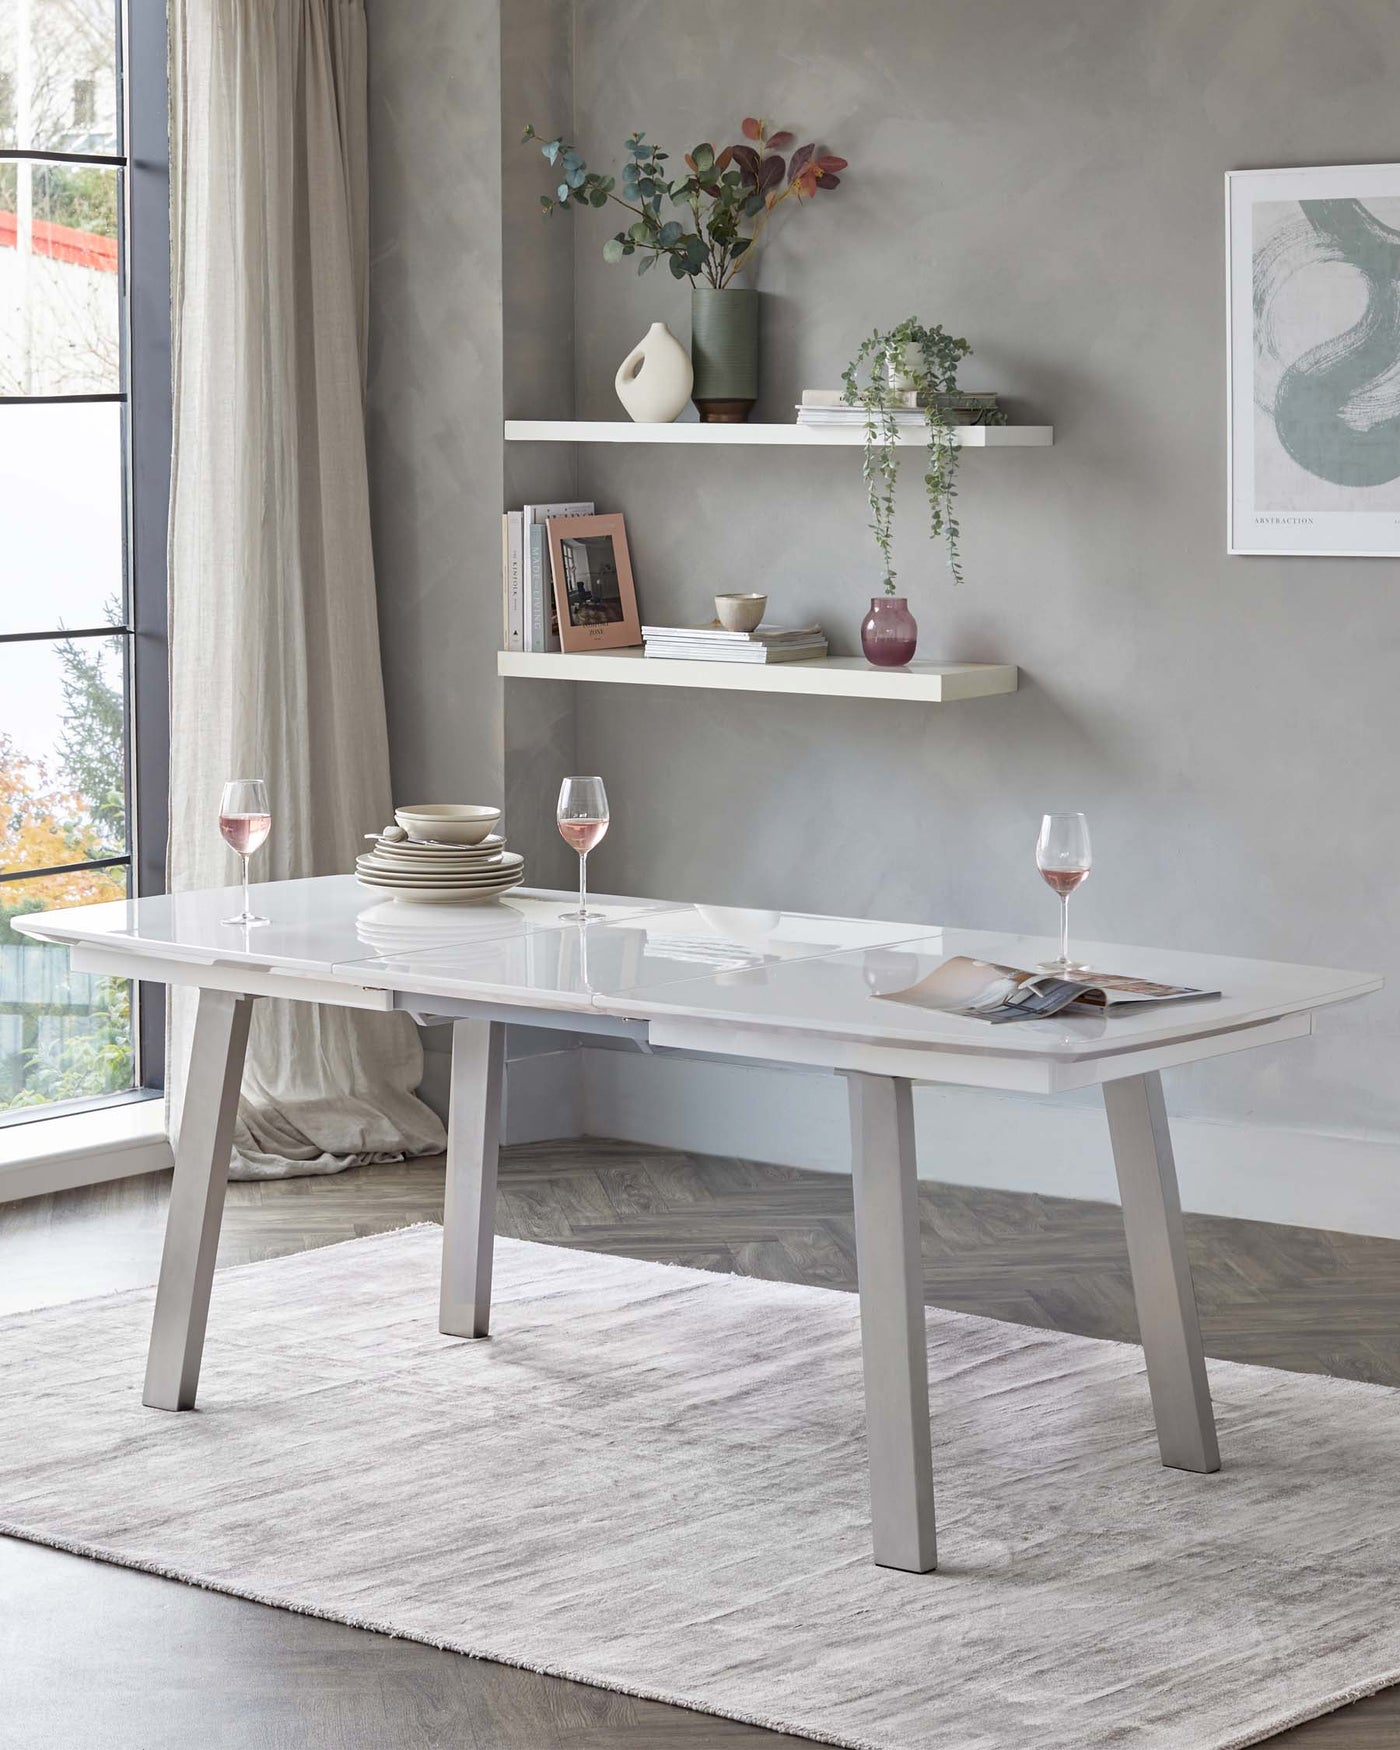 Modern light grey dining table with a reflective surface and angled legs, accompanied by two white floating shelves on a textured wall above, displaying decorative items and books. A soft grey area rug lies beneath the table.